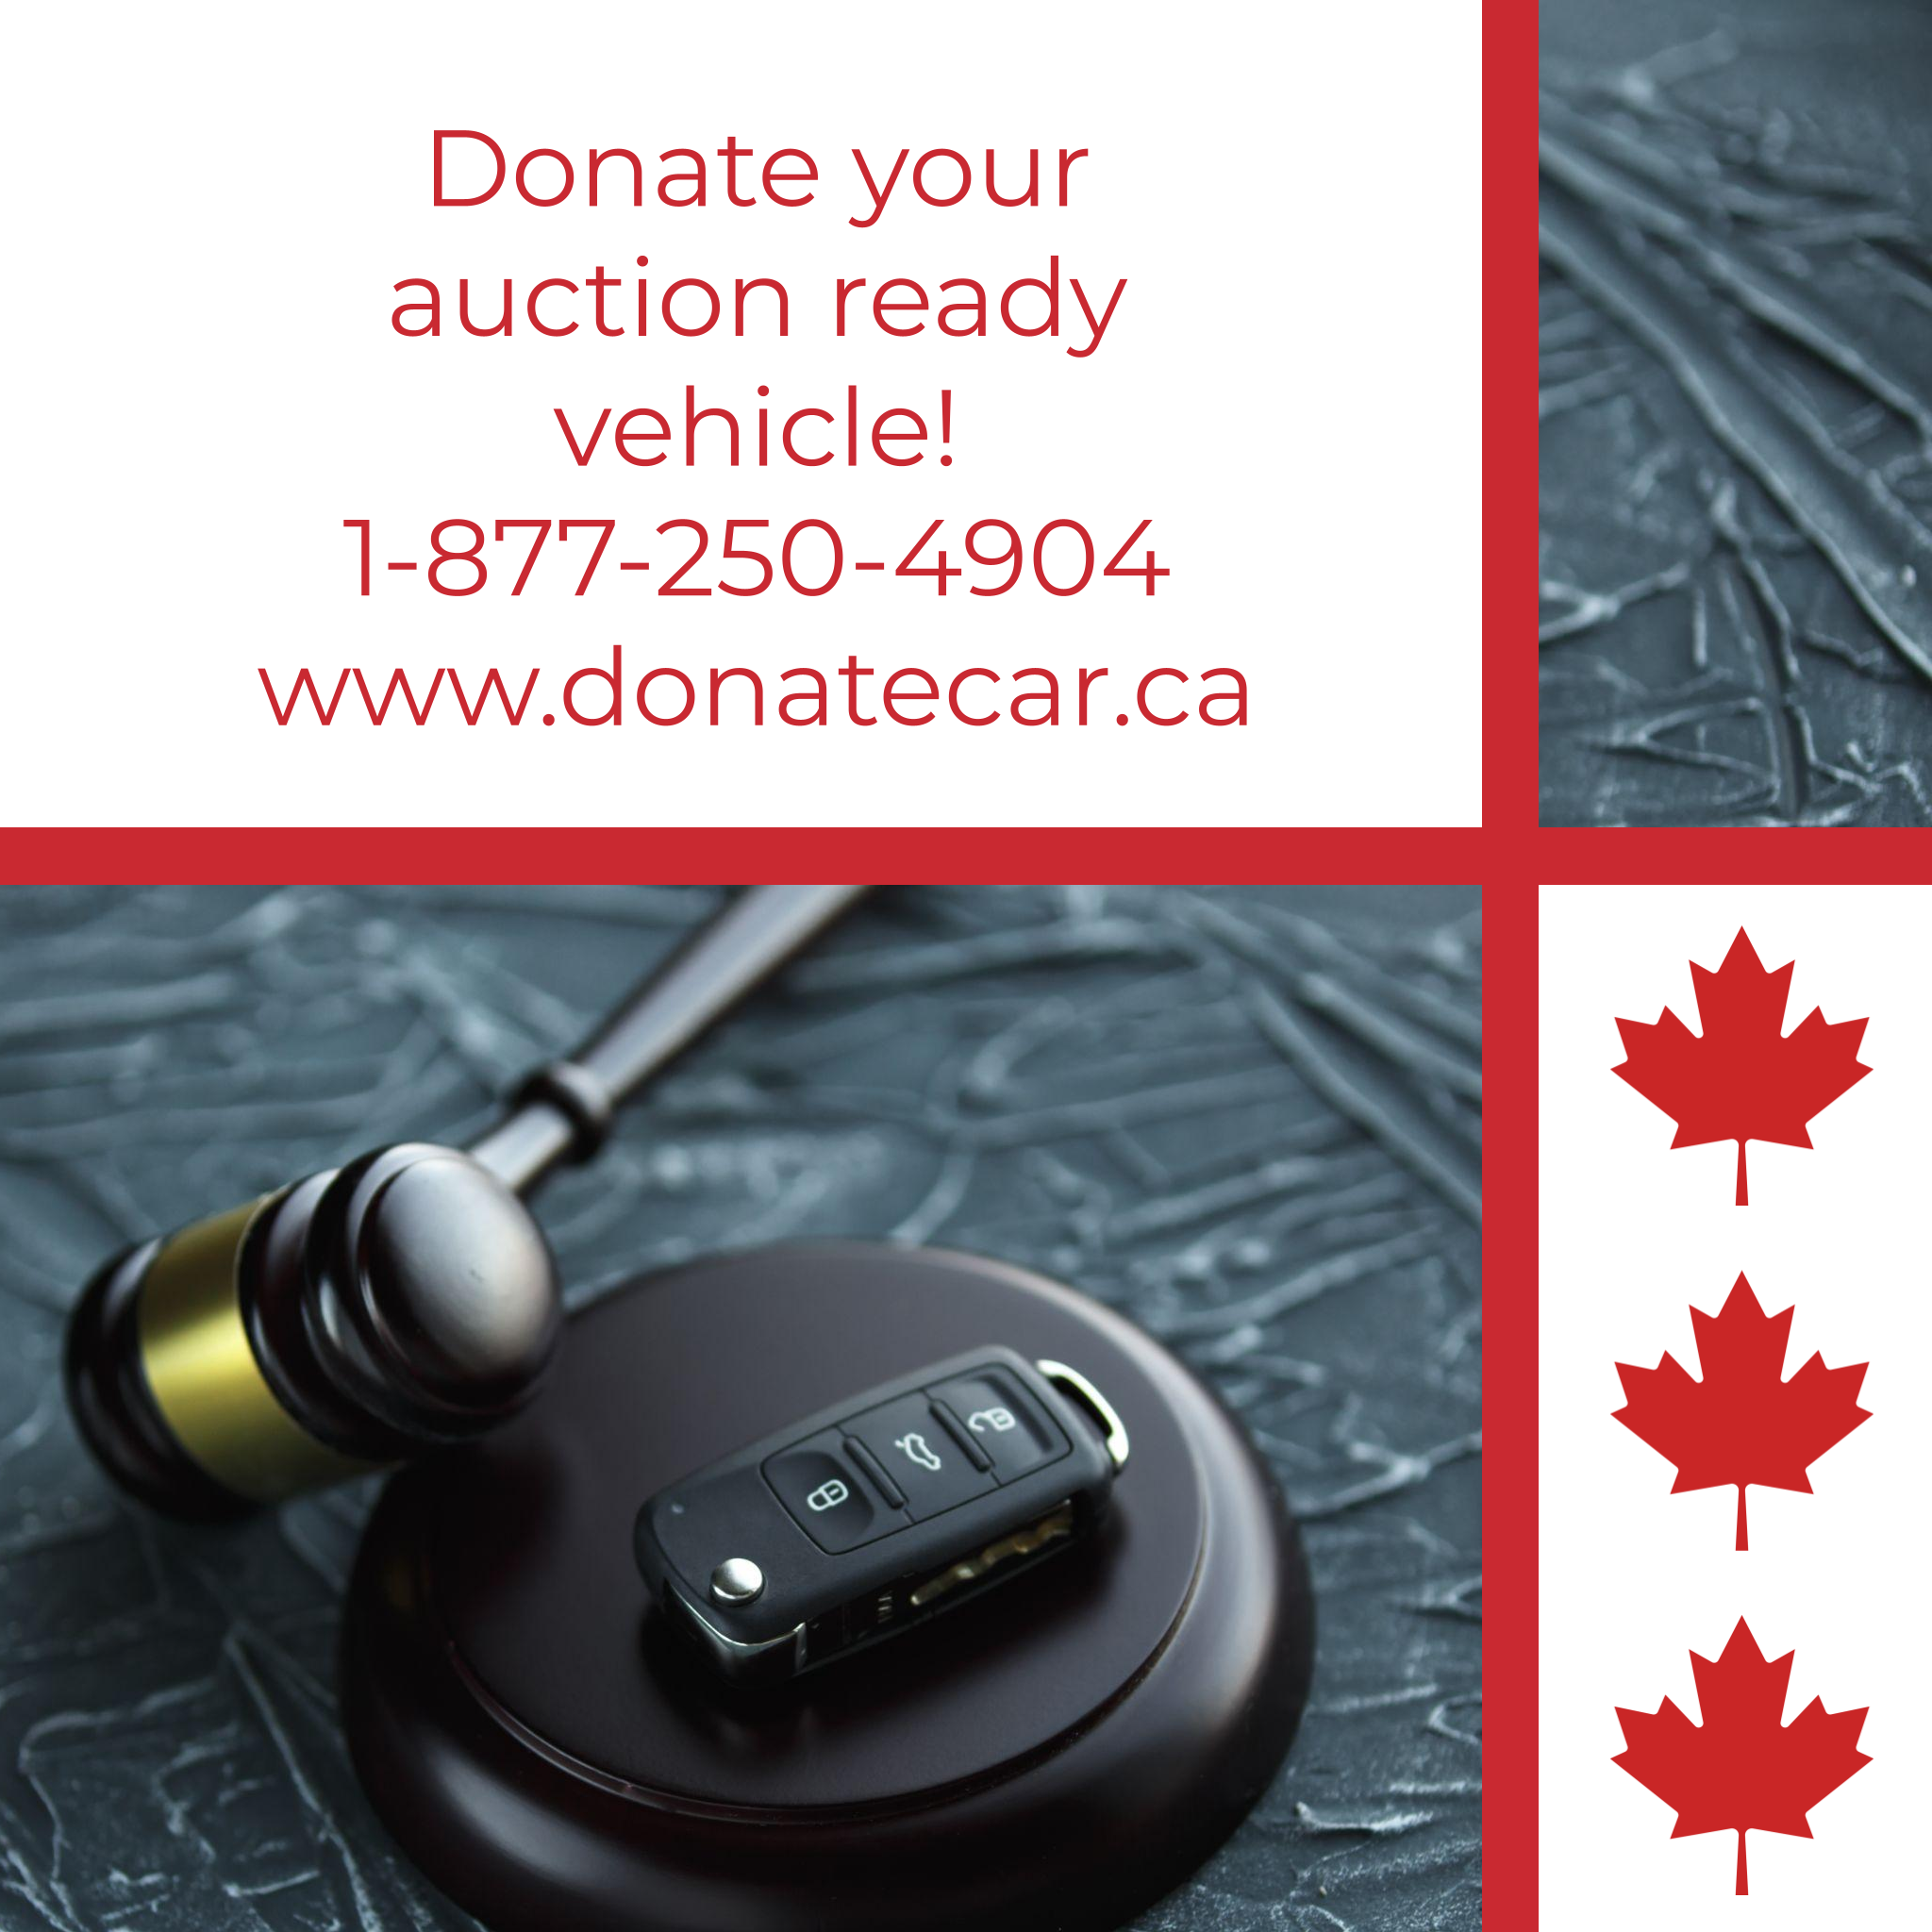 Red text on white background reads Donate your auction ready vehicle! Donate a Car Canada Image of car key fob and auction gavel on a gray background with border of three red maple leaves